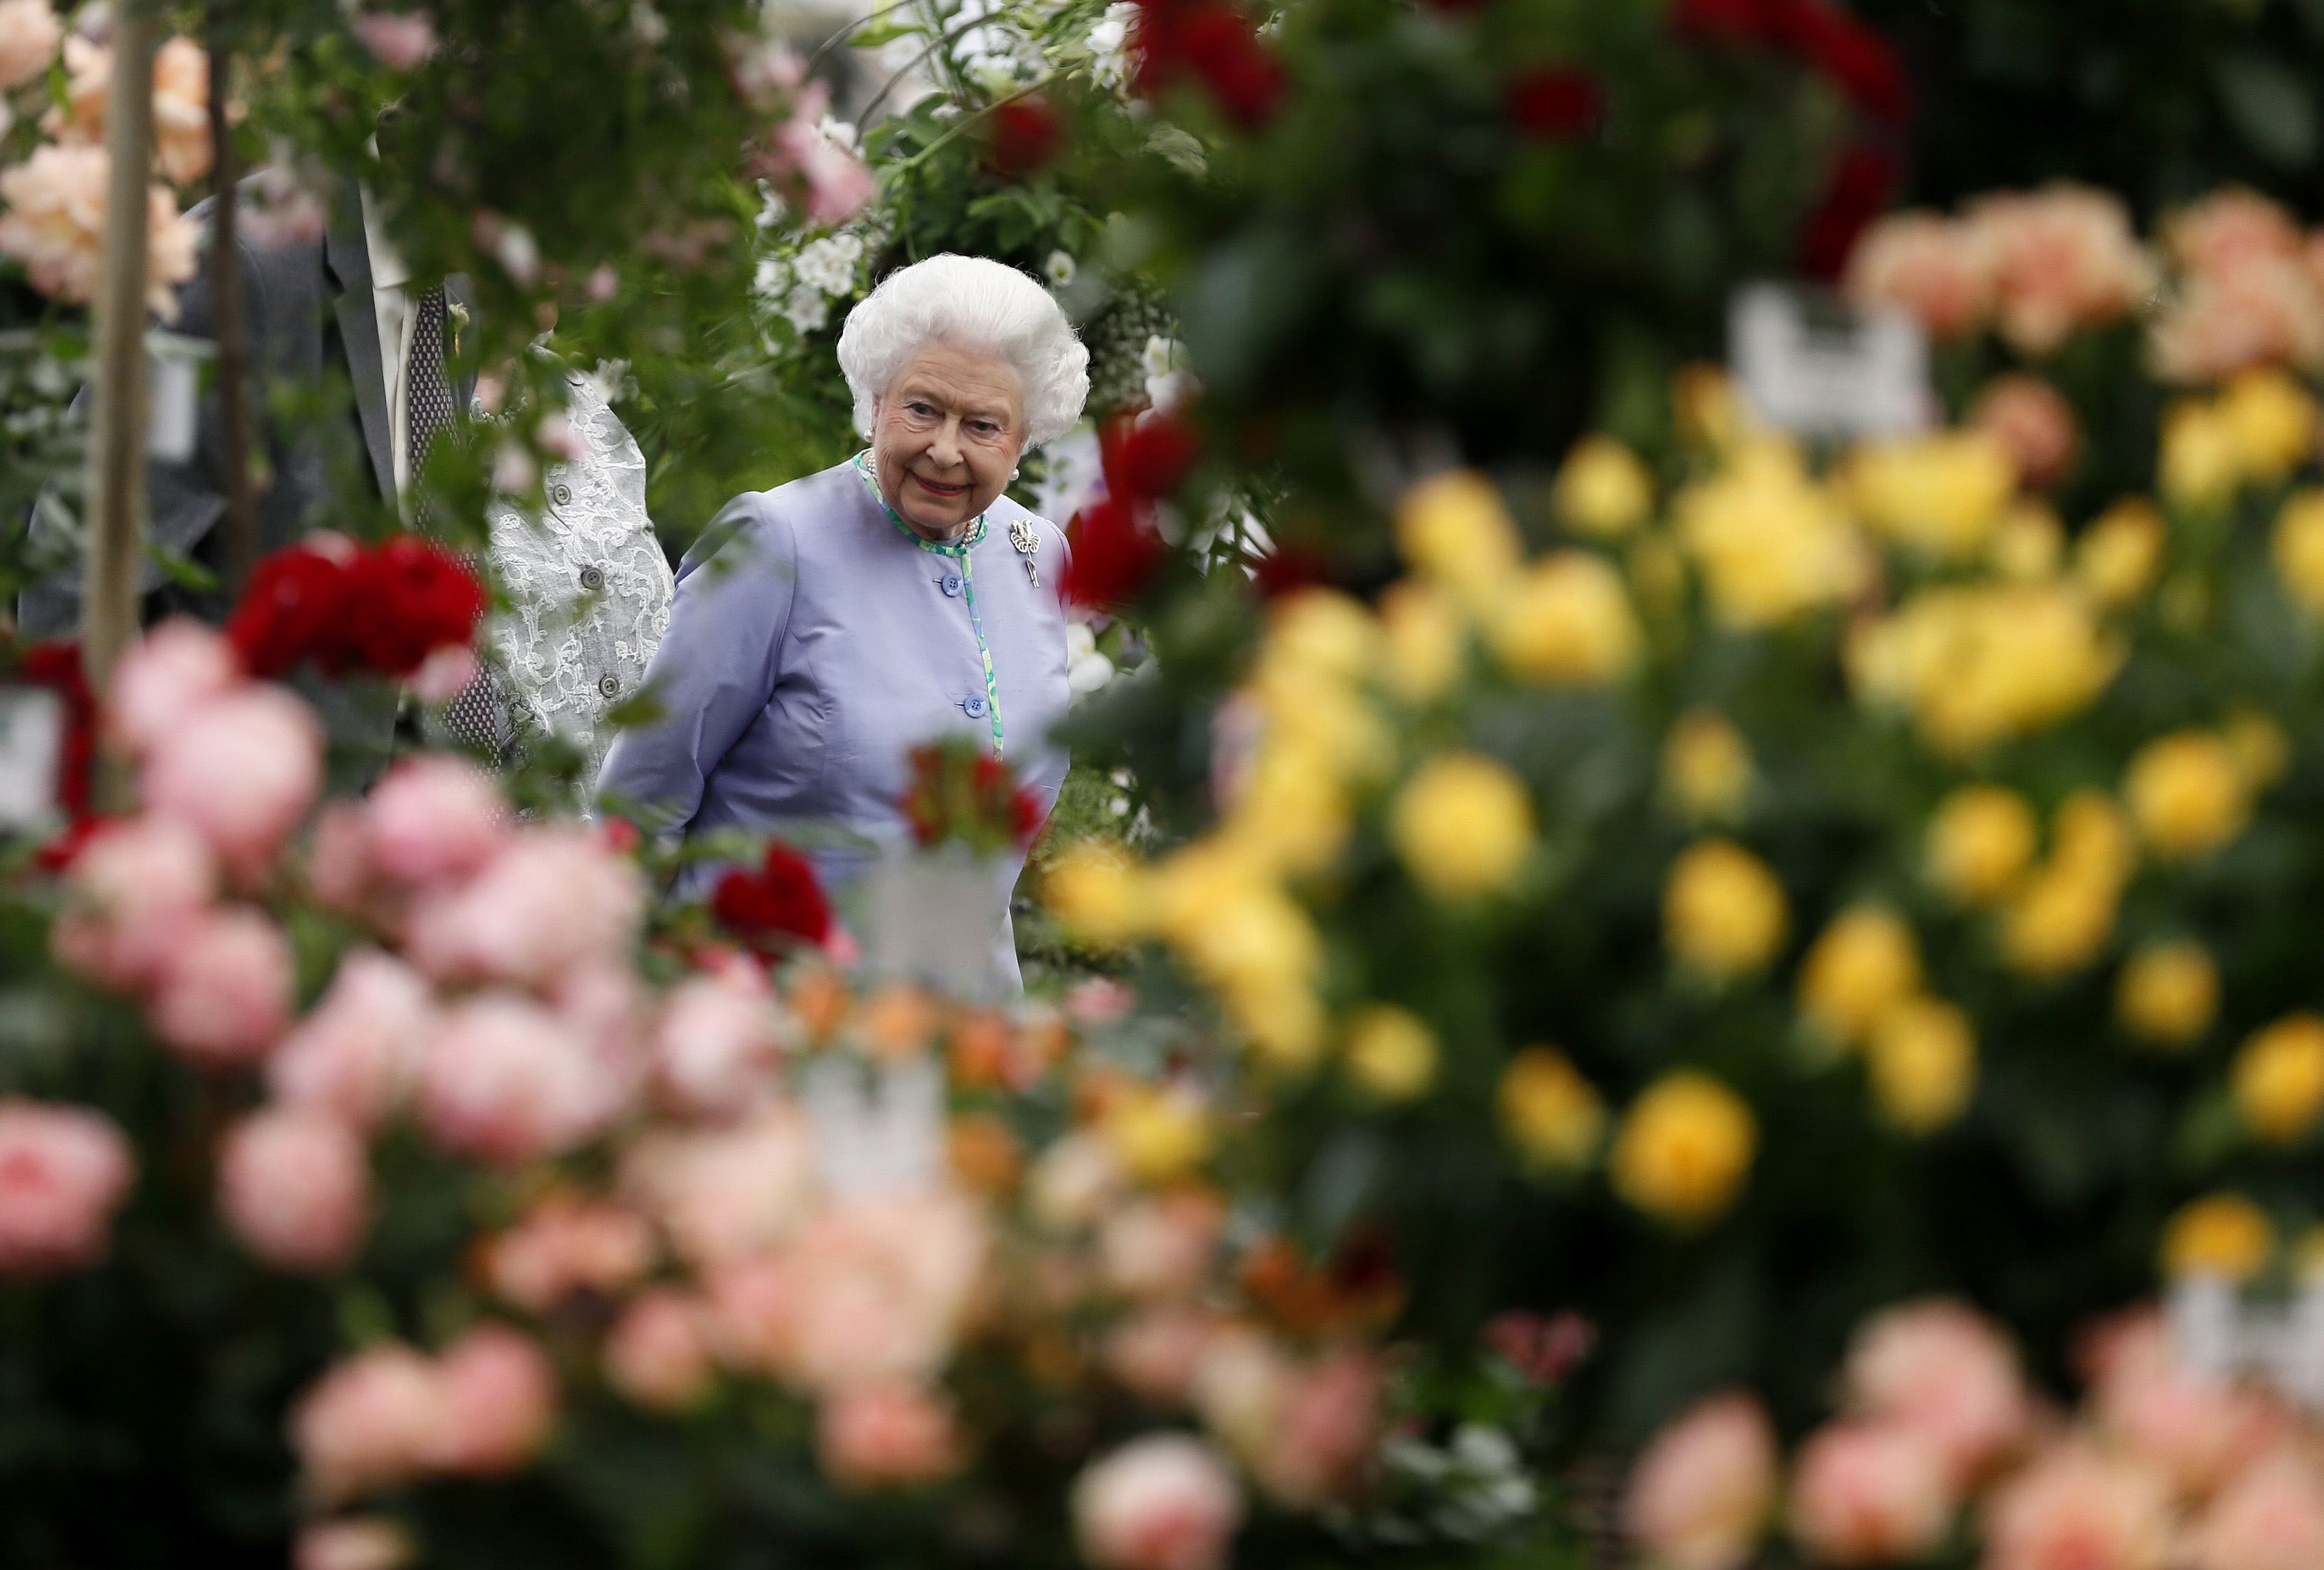 LONDON, UNITED KINGDOM - MAY 19: Queen Elizabeth II looks at a display during a visit to the Chelsea Flower Show on press day on May 19, 2014 in London, England. (Photo by Stefan Wermuth - WP